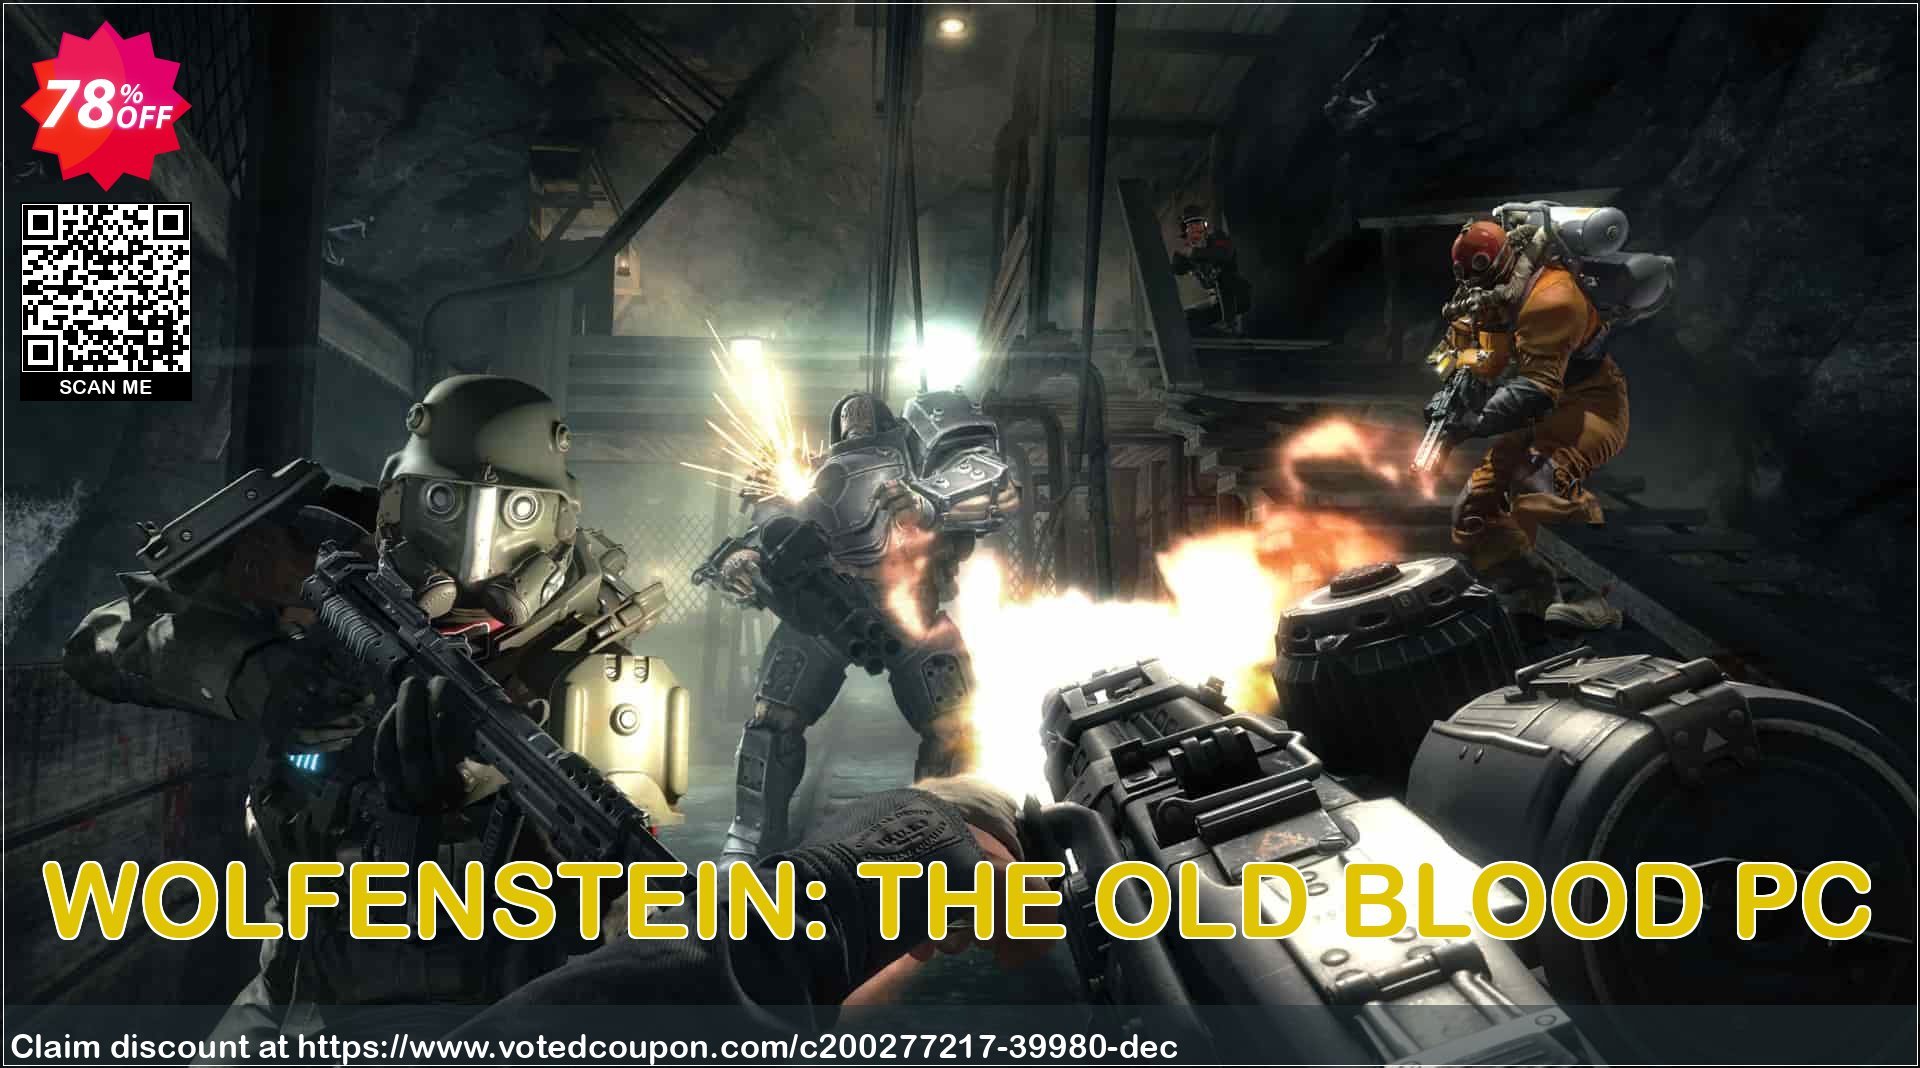 WOLFENSTEIN: THE OLD BLOOD PC Coupon Code Apr 2024, 78% OFF - VotedCoupon